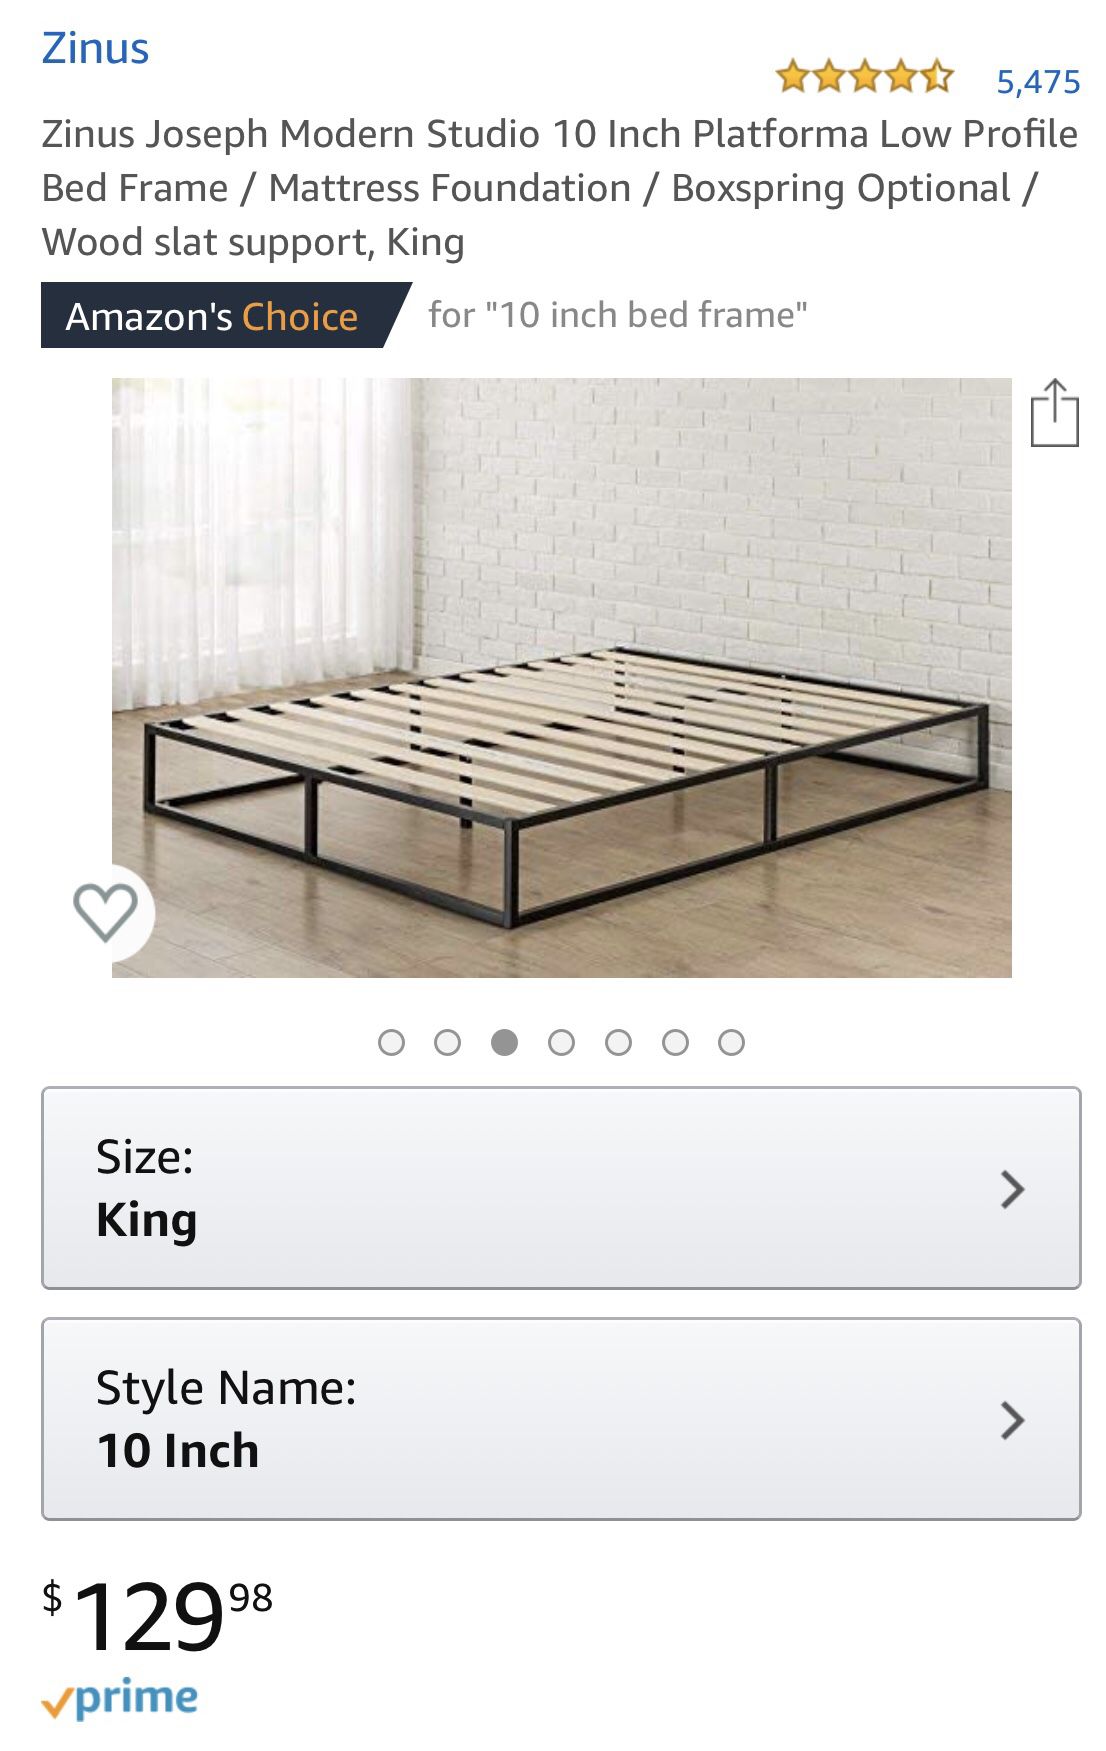 Kind size Low profile bed frame new in box